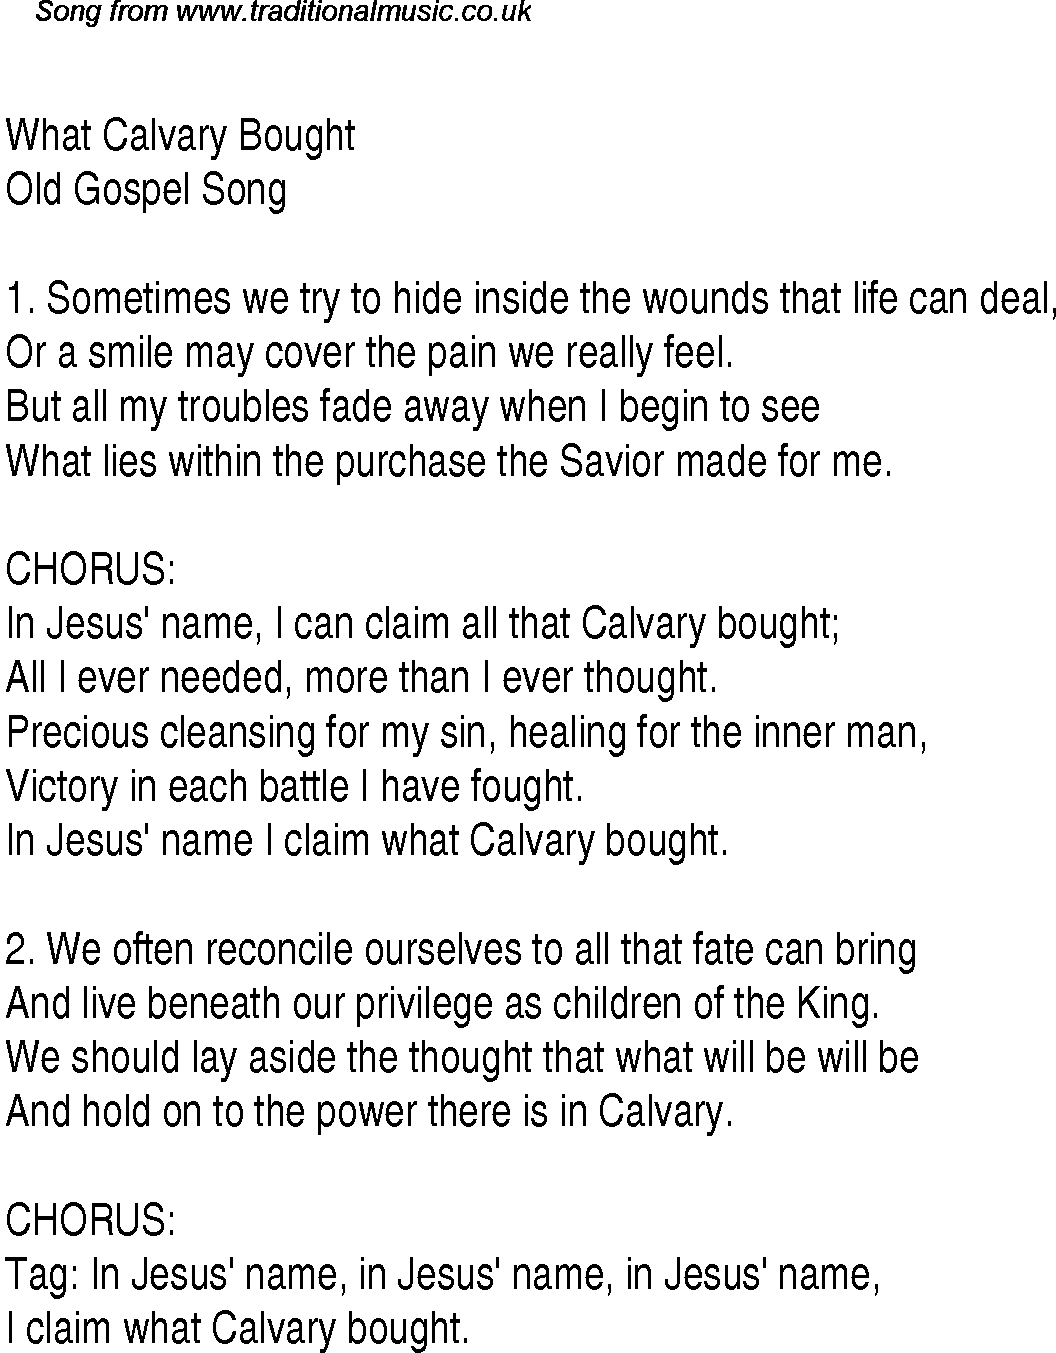 Gospel Song: what-calvary-bought, lyrics and chords.